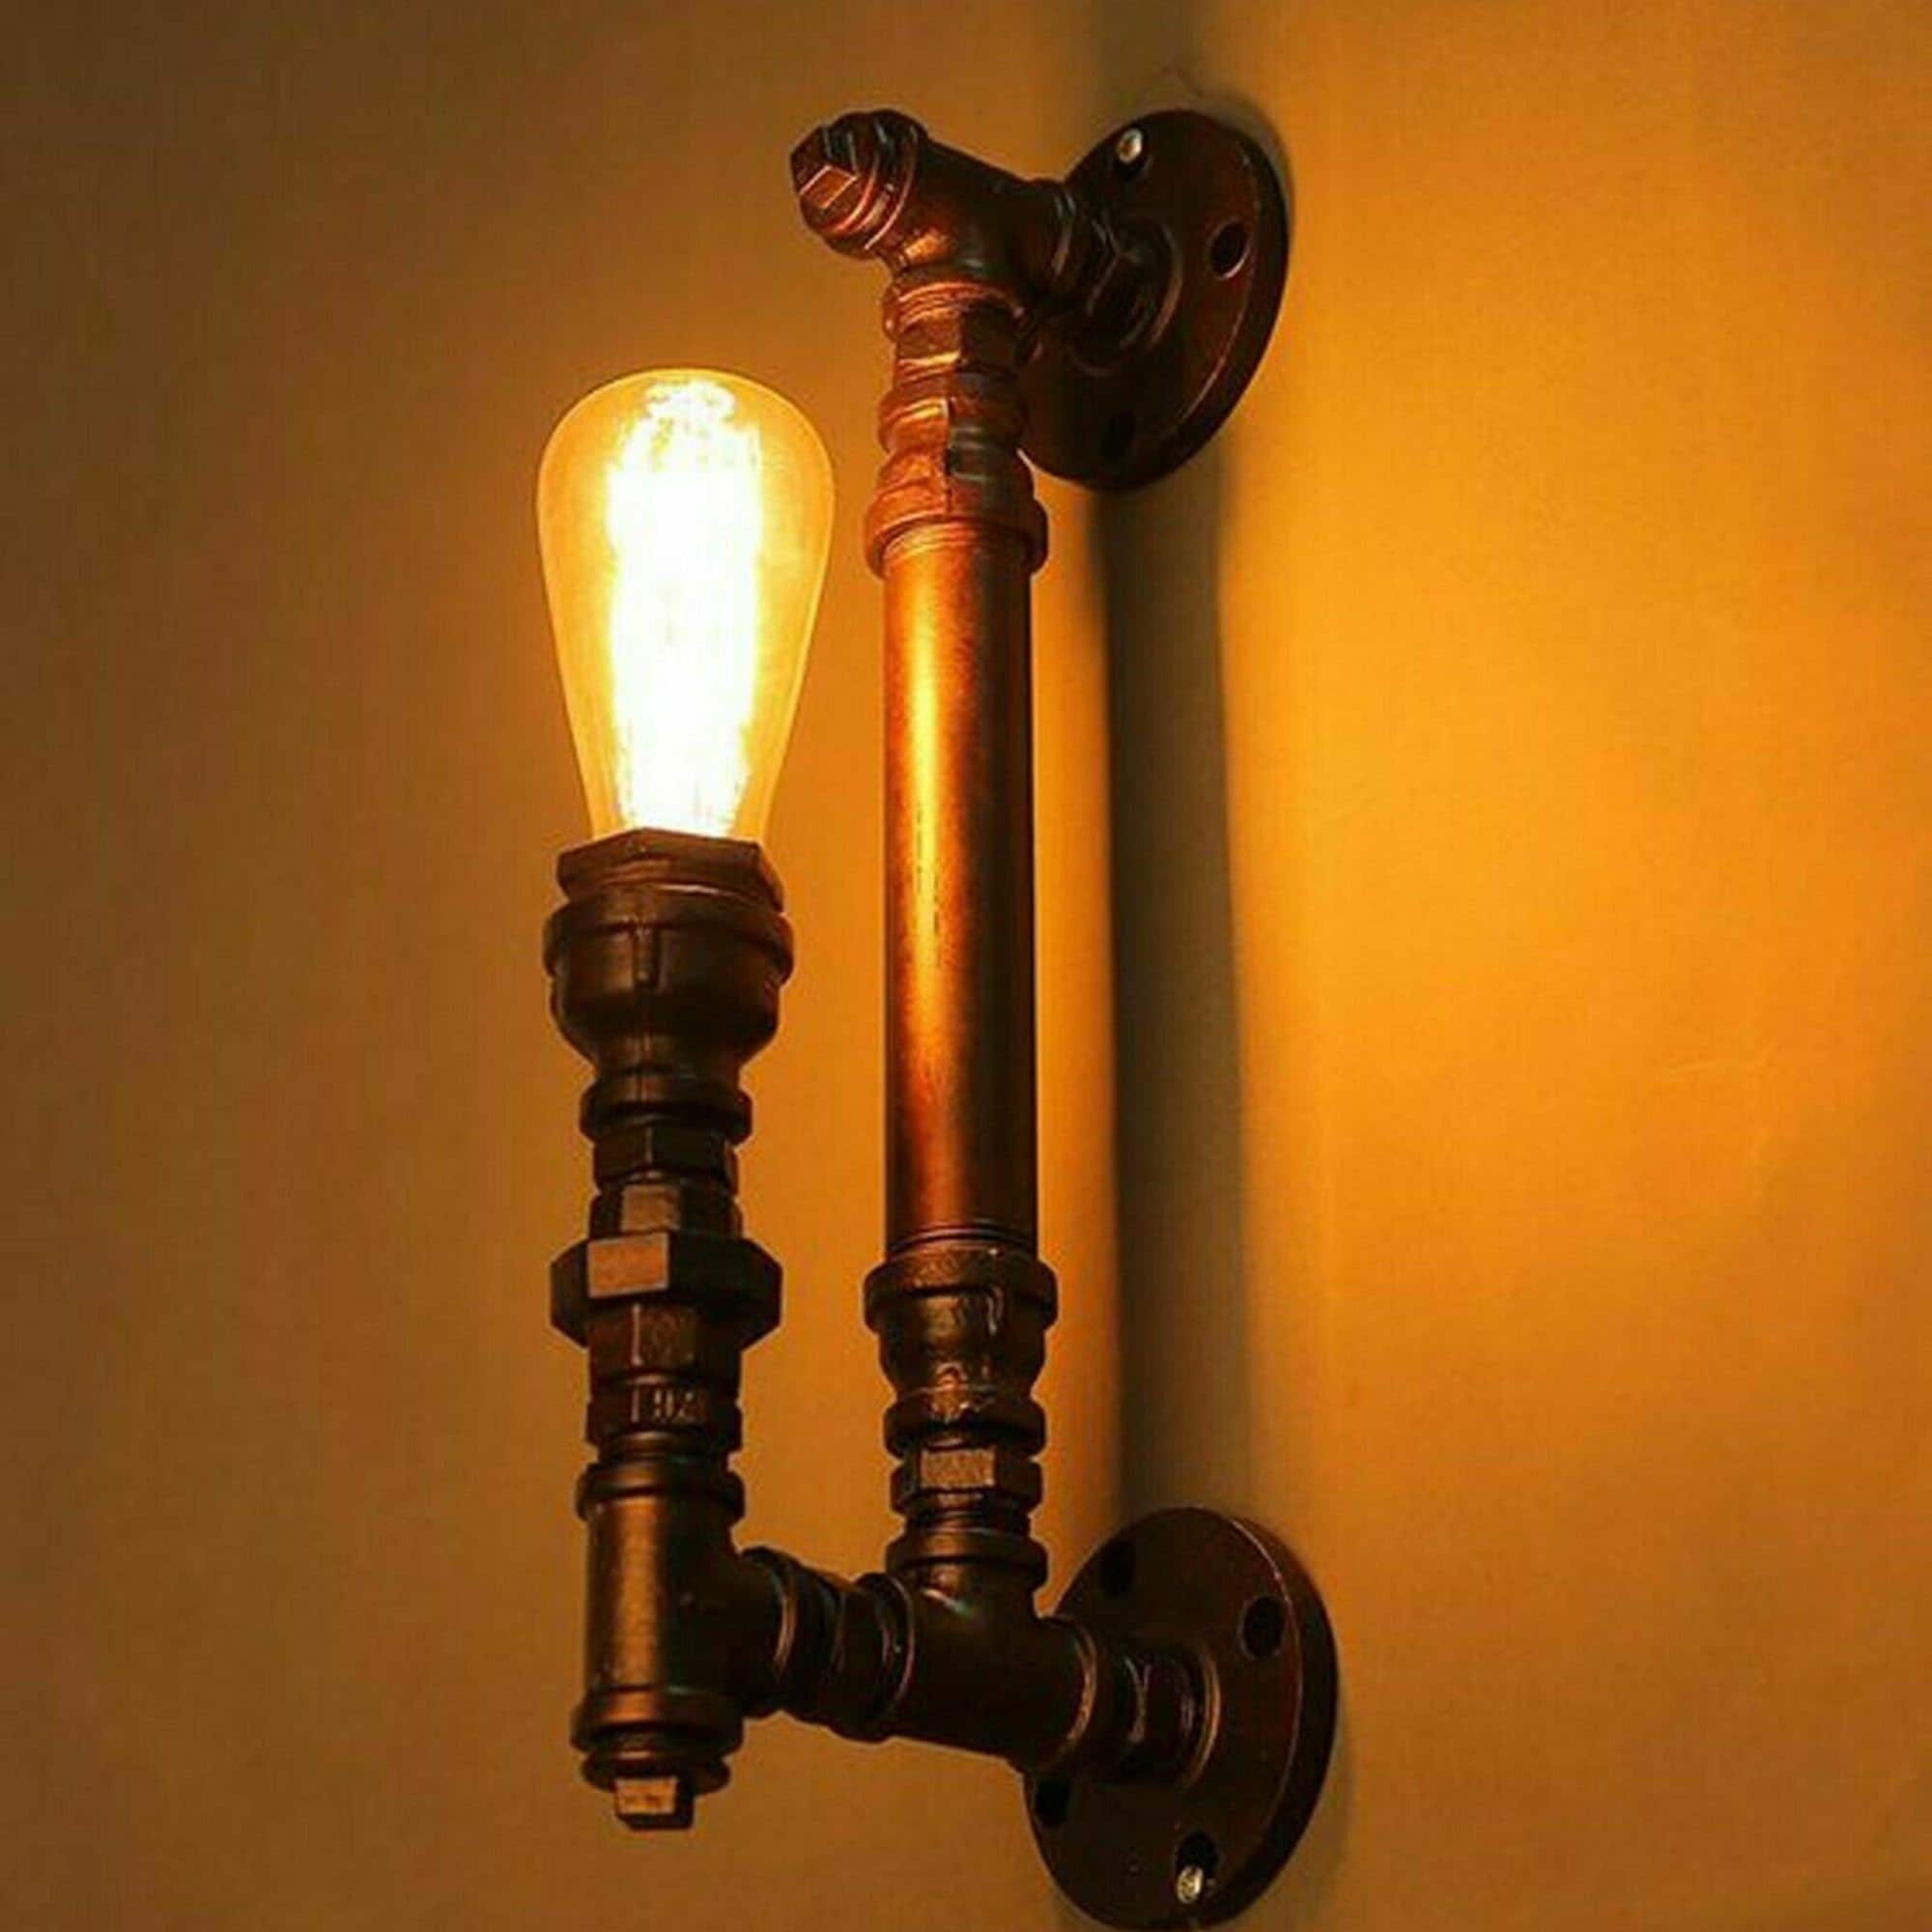 Long Life Lamp Company Vintage Industrial Water Pipe Wall Light Rustic Lamp Metal Steampunk 